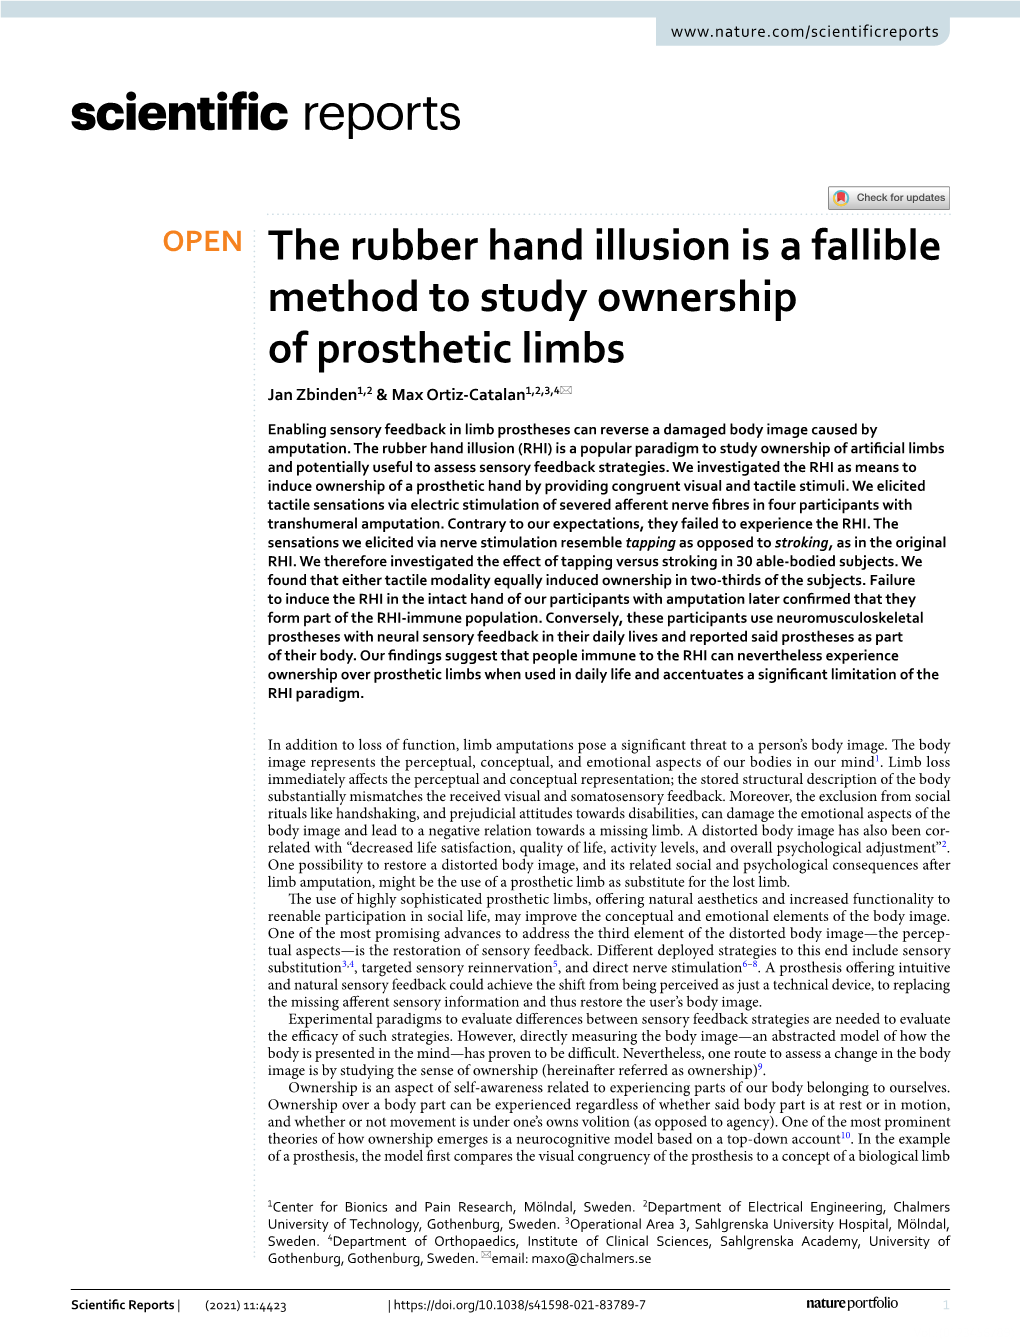 The Rubber Hand Illusion Is a Fallible Method to Study Ownership of Prosthetic Limbs Jan Zbinden1,2 & Max Ortiz‑Catalan1,2,3,4*